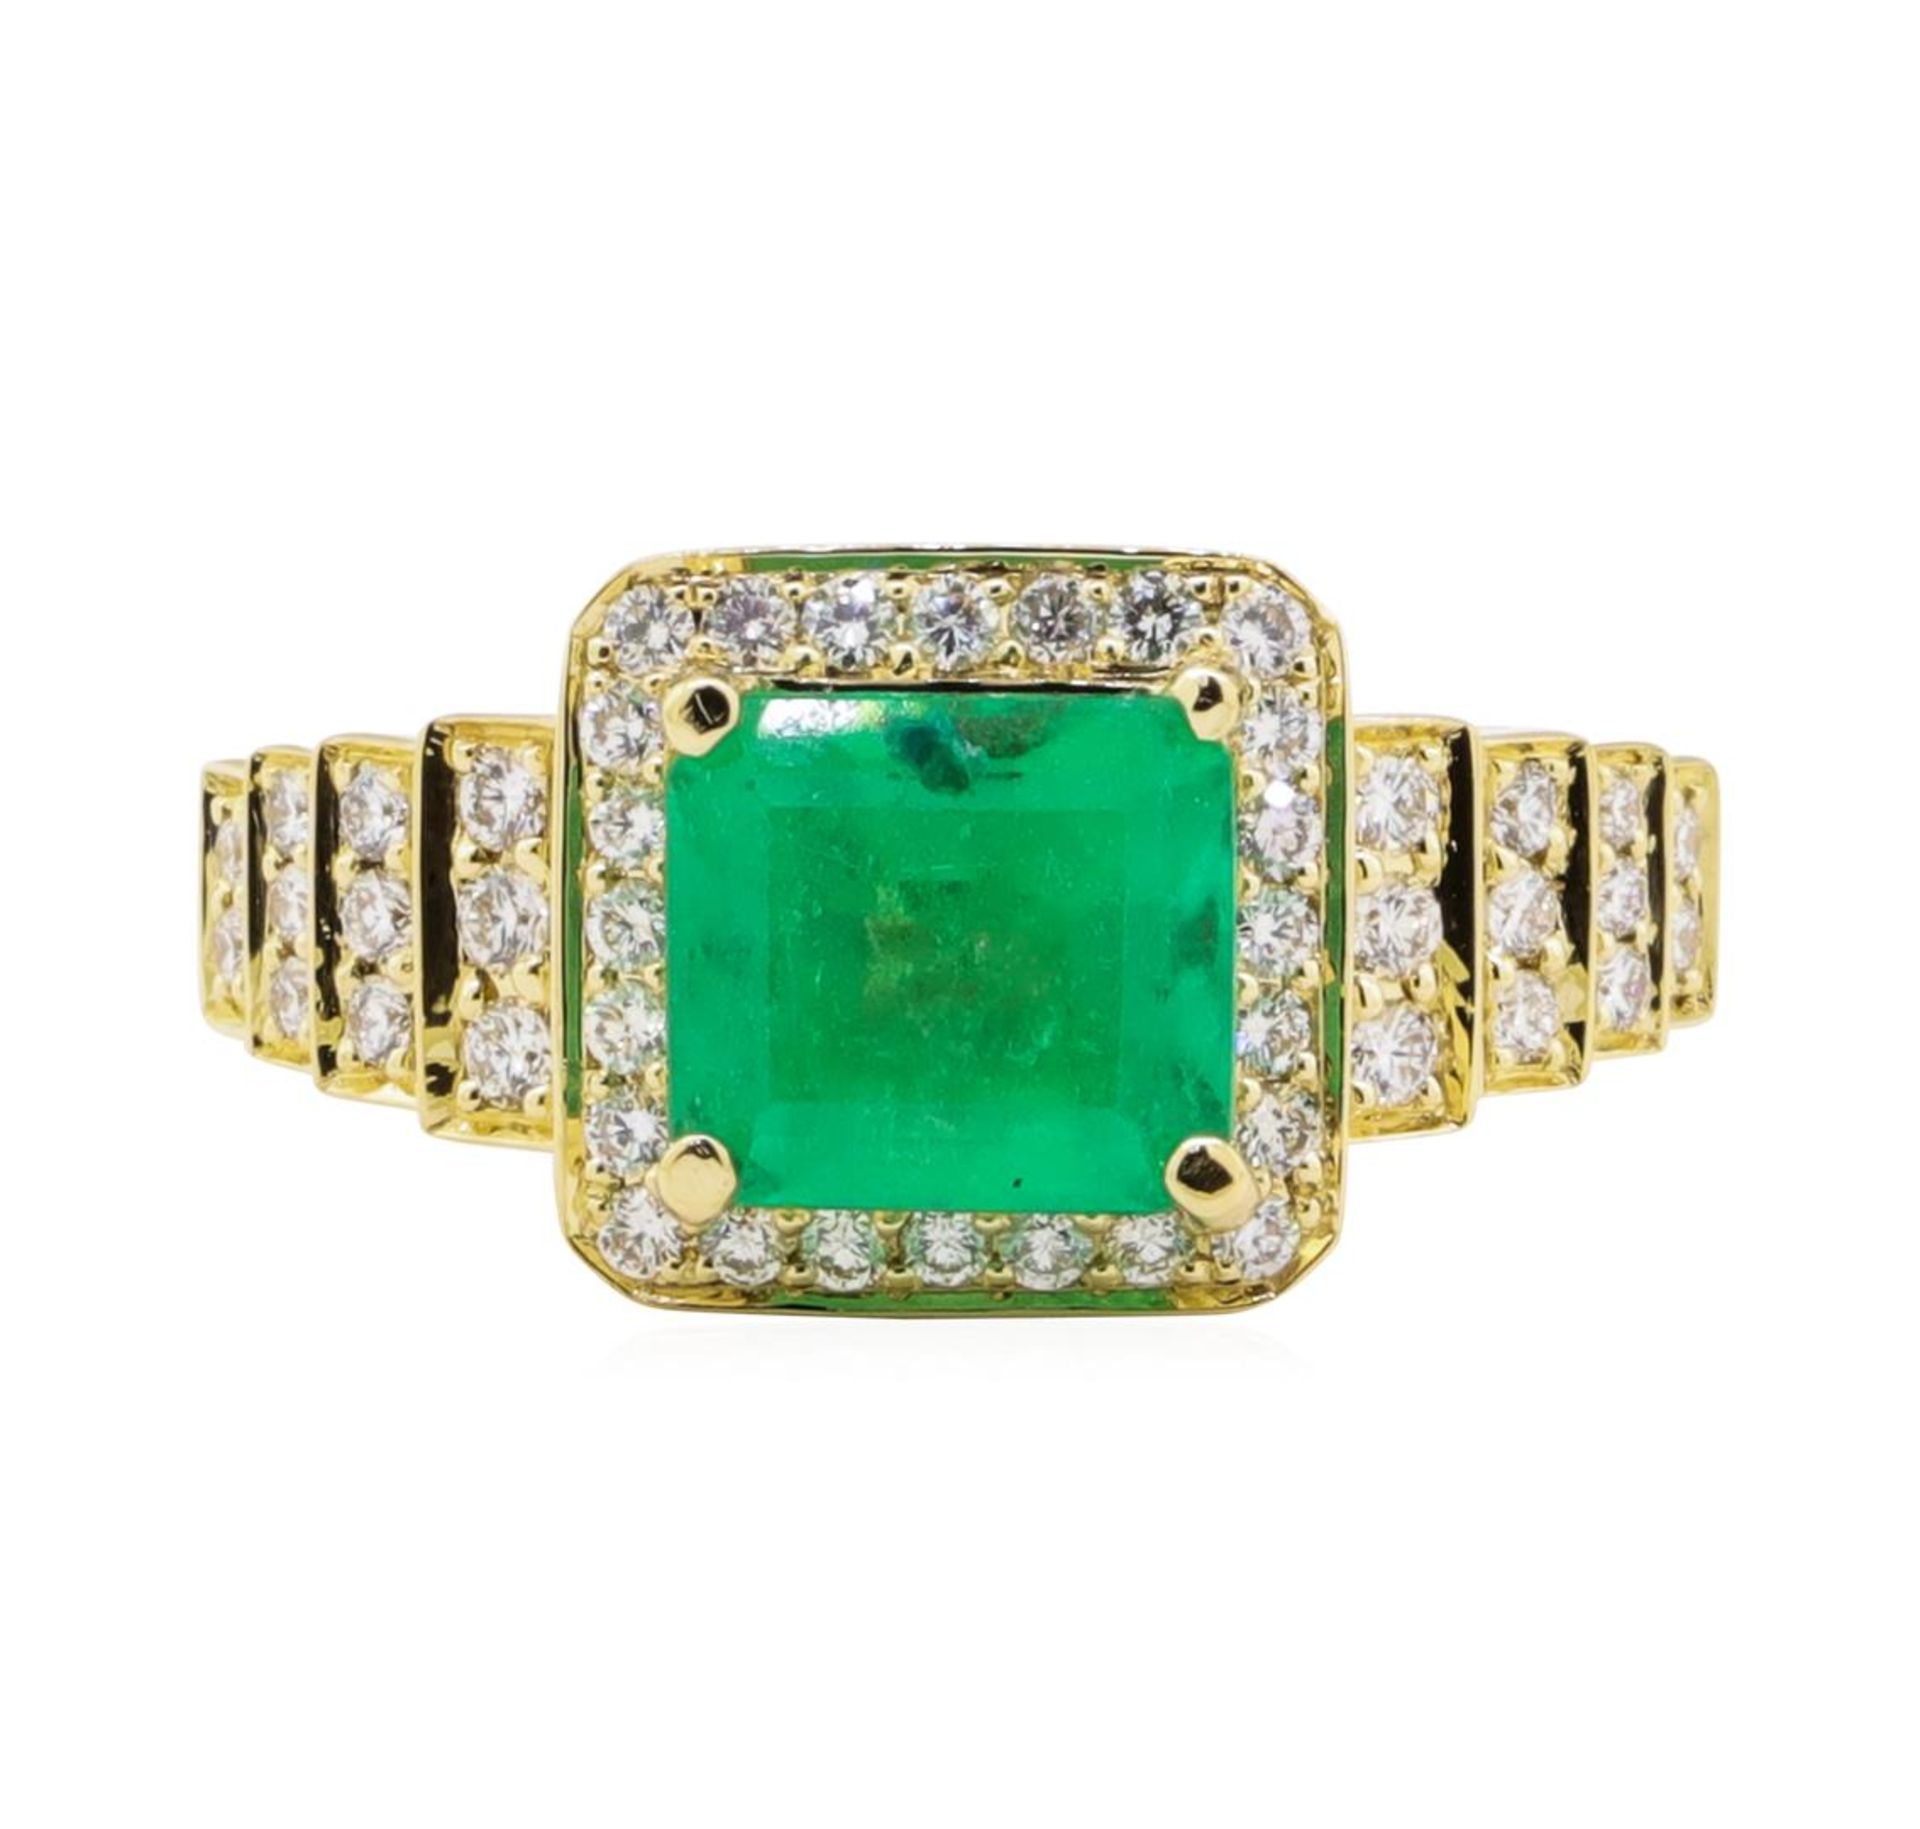 2.56 ctw Emerald and Diamond Ring - 18KT Yellow Gold - Image 2 of 5